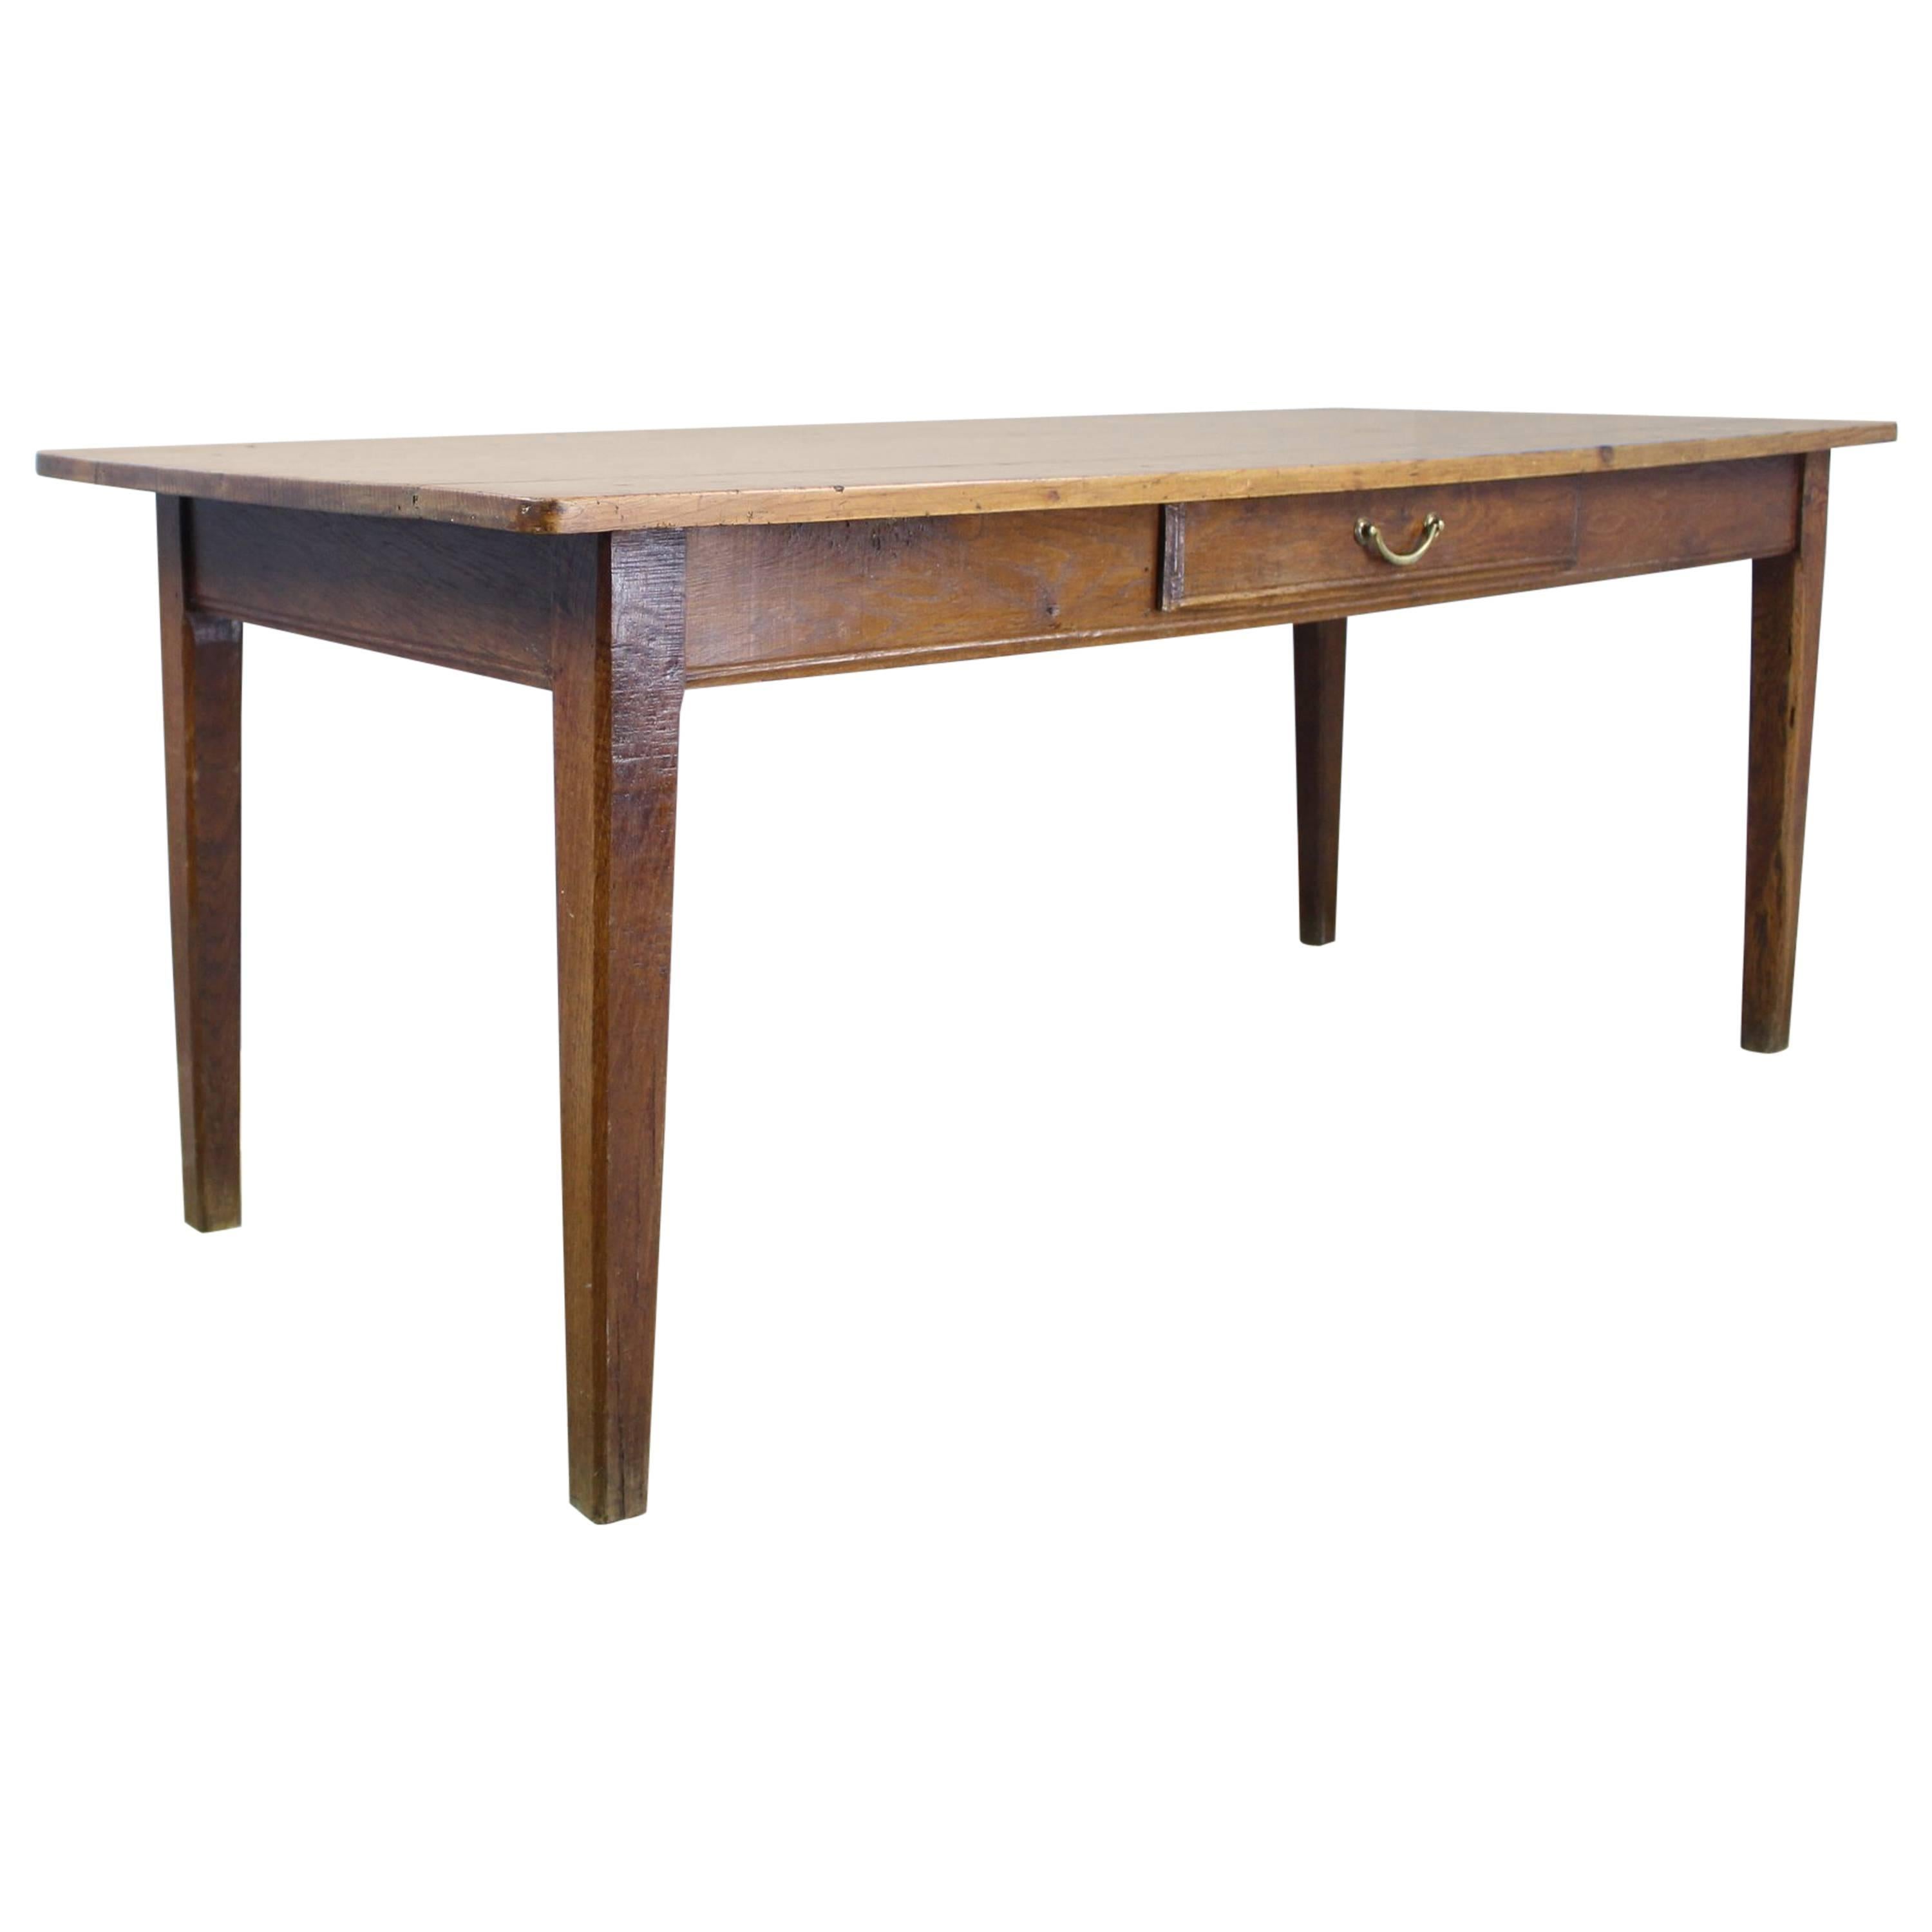 Antique French Farm Table with Pine Top and Chestnut Base